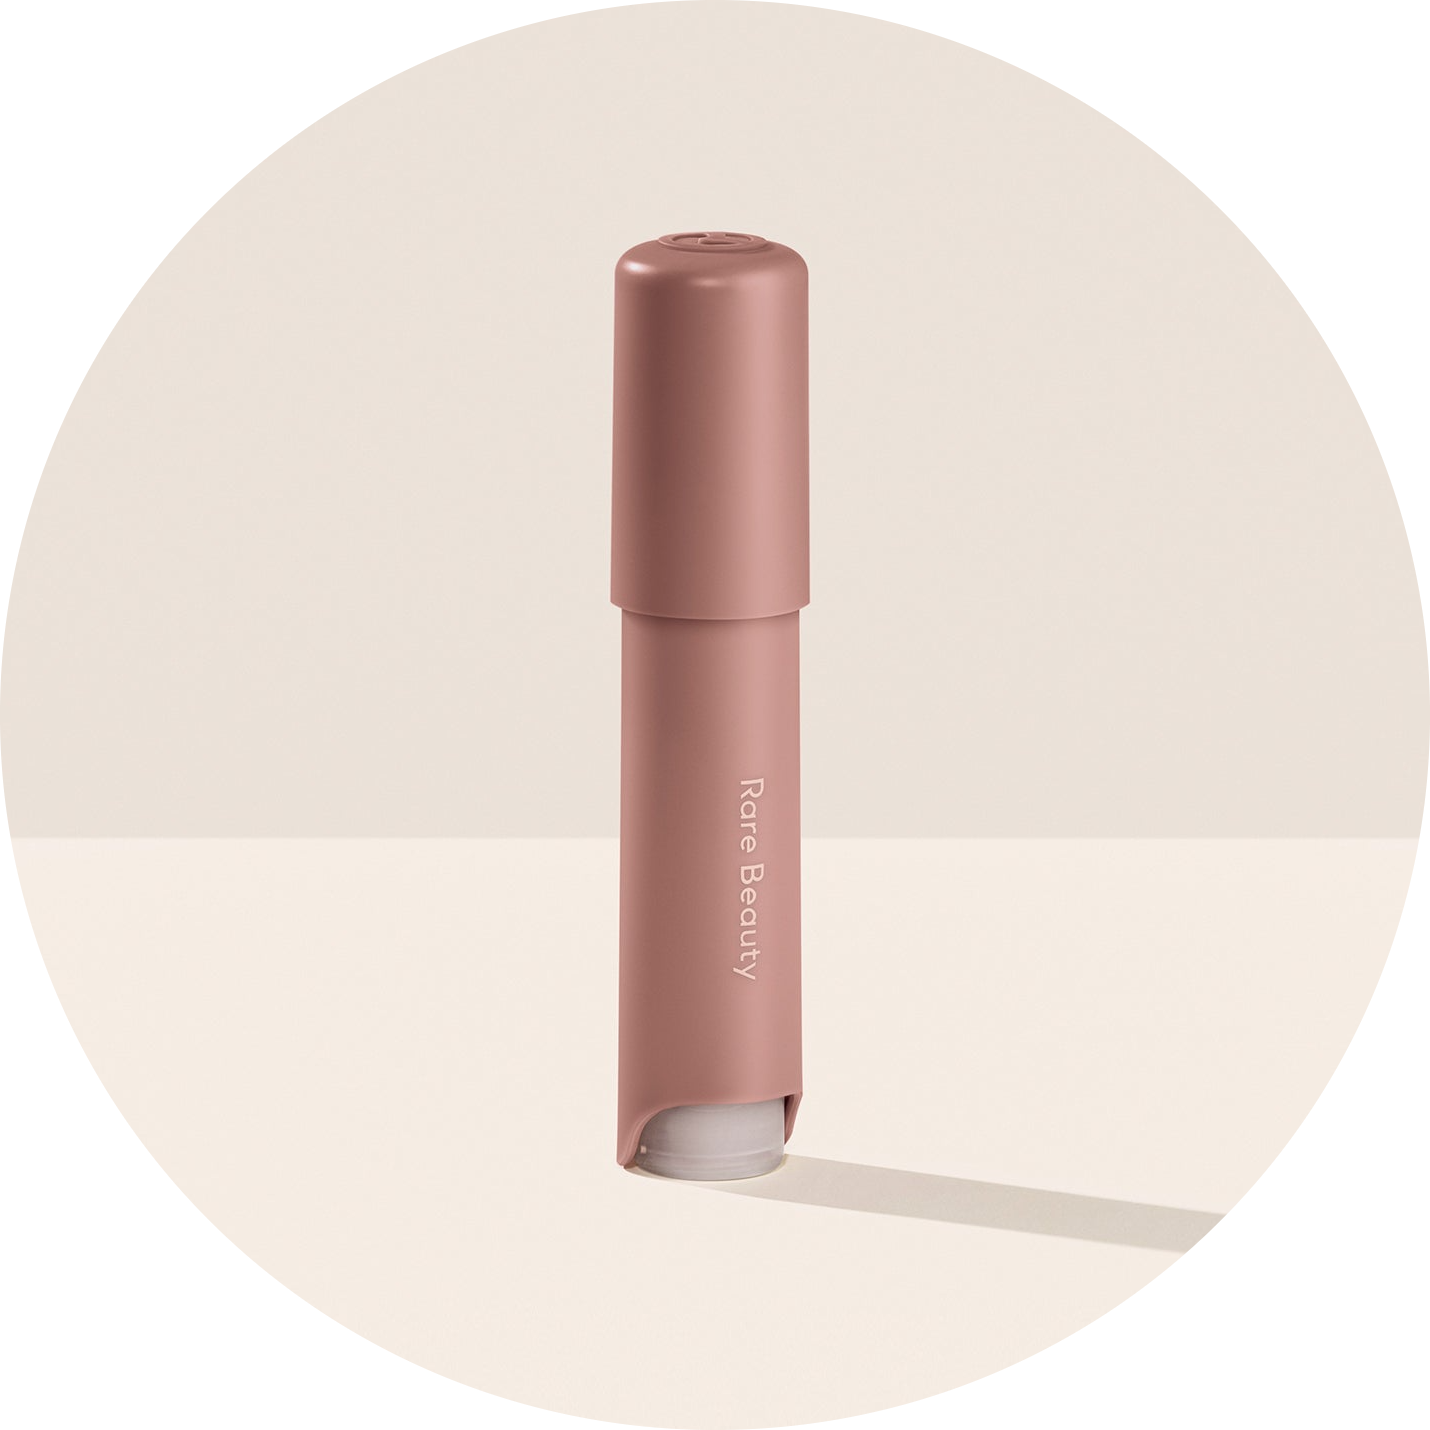 Find Comfort Stop & Soothe Aromatherapy Pen – NudeFace Chile